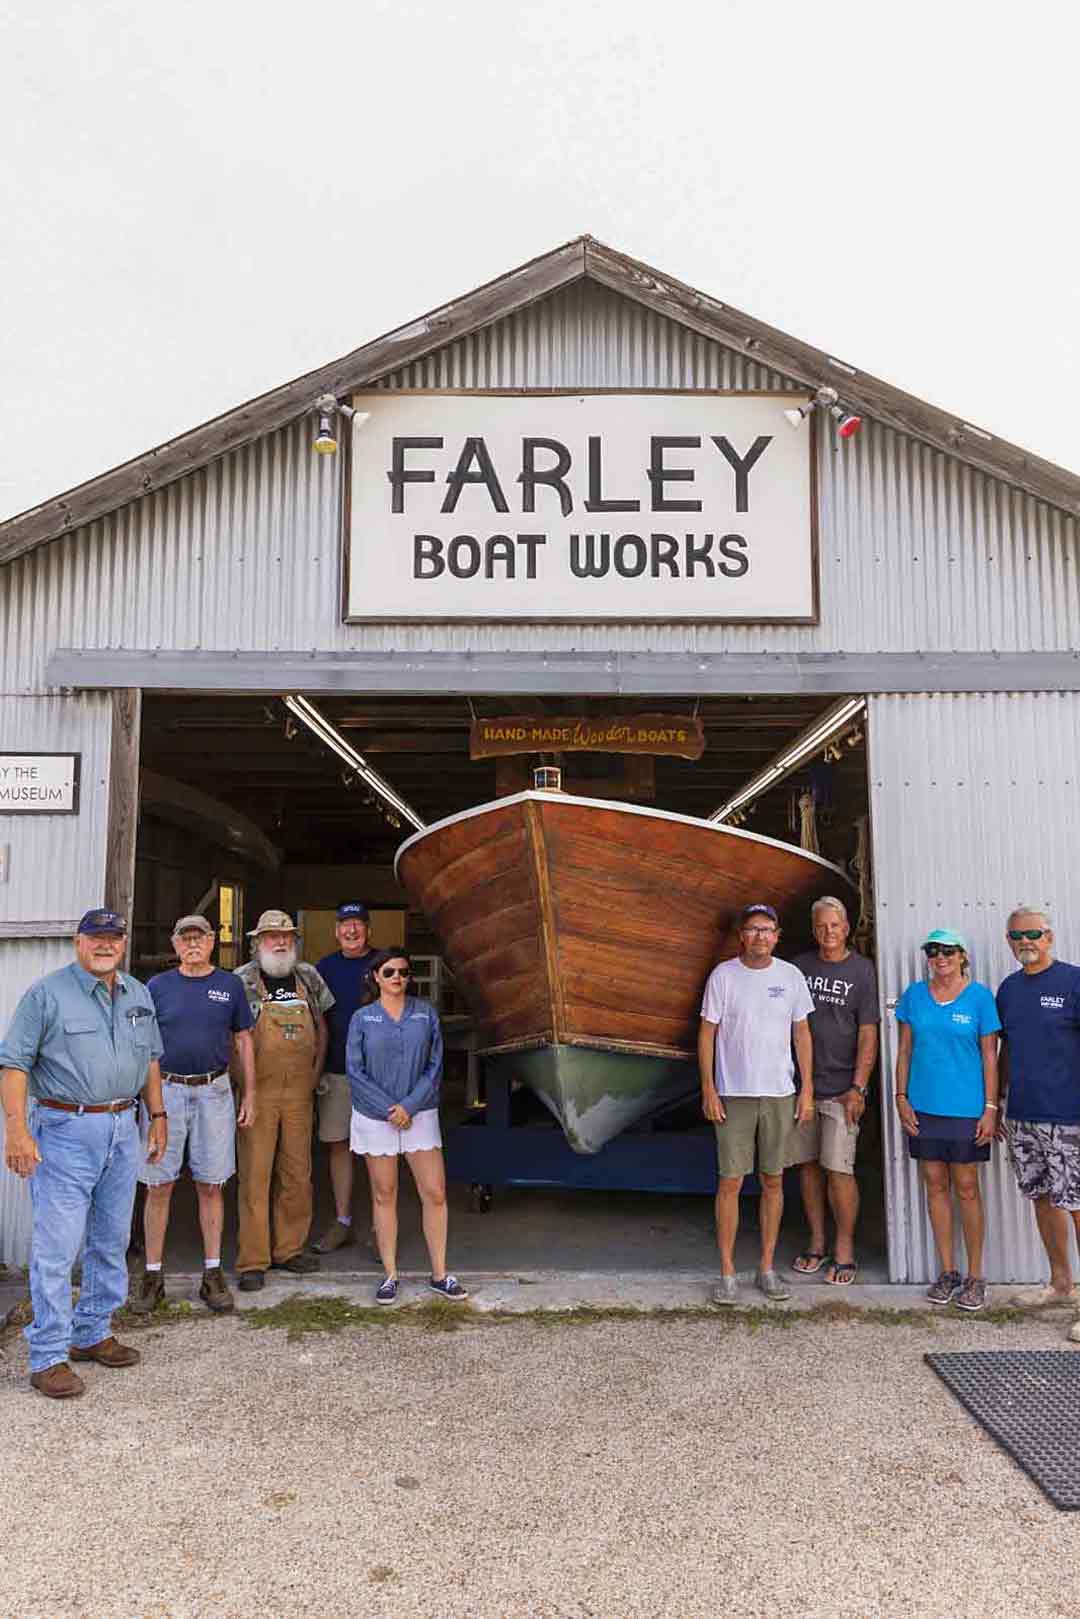 Charles Ferguson with several people in front of Farley Boat Works